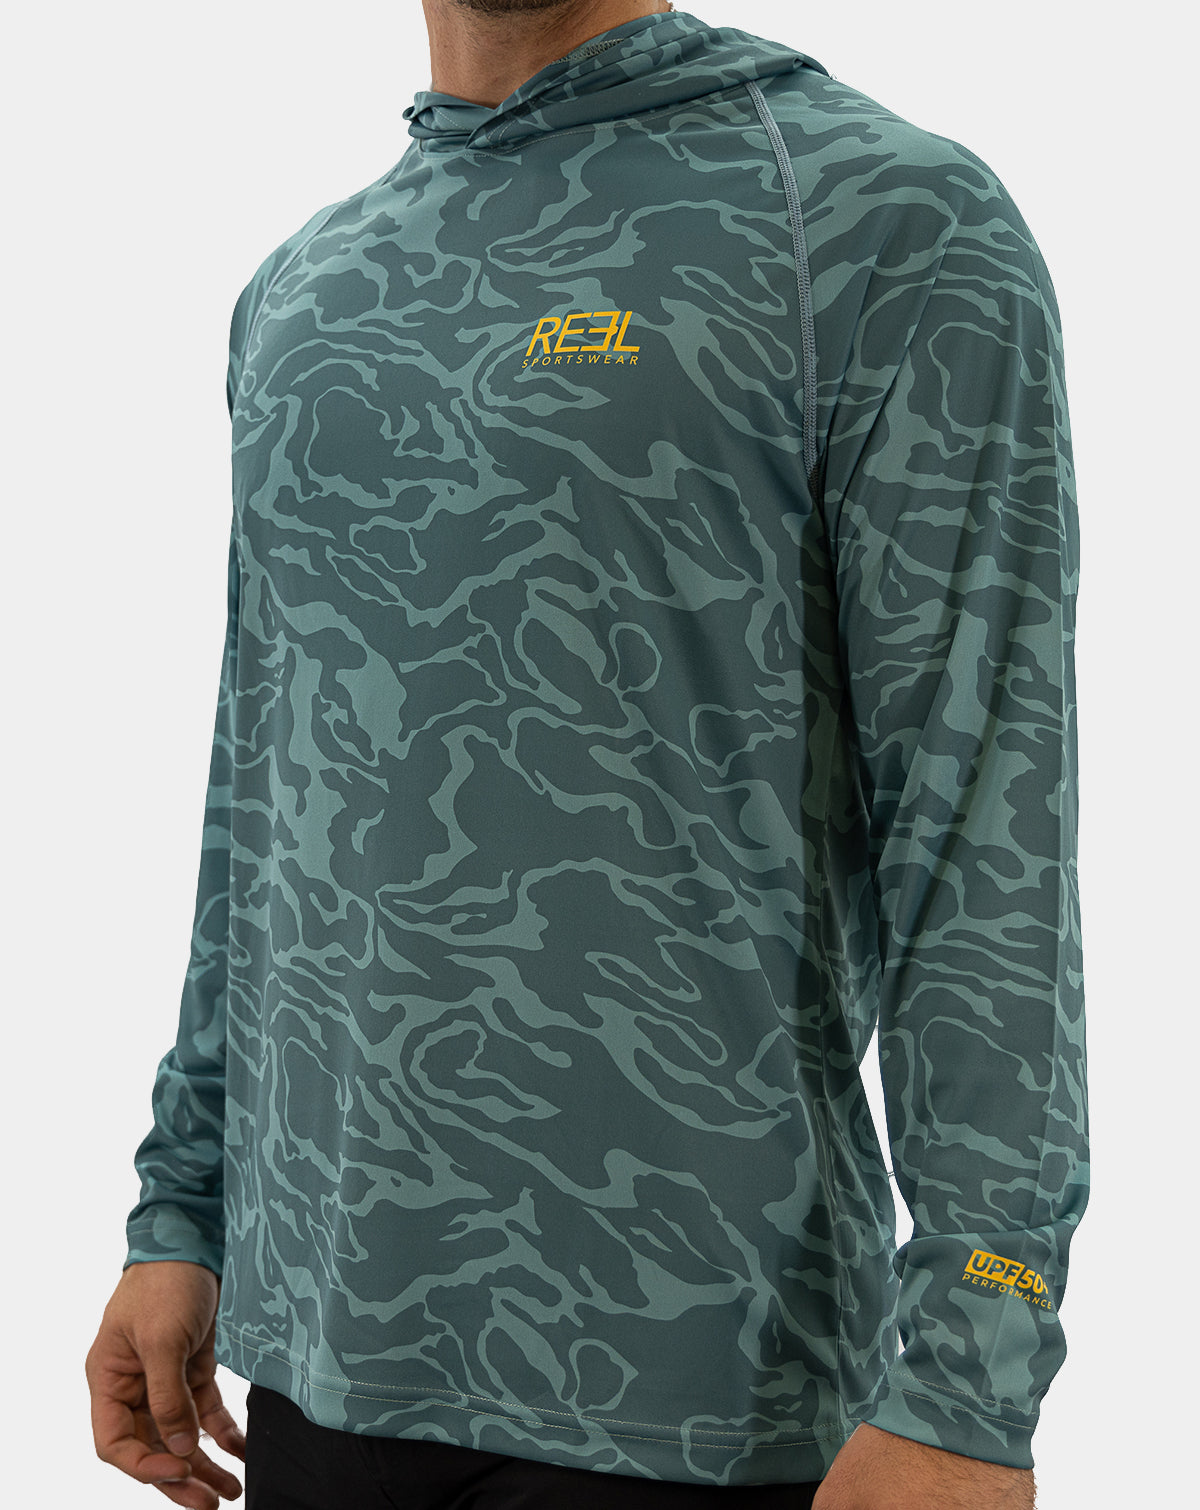 Men's Long Sleeve Reef Donkey Fishing Shirt With Hoodie – TBBC Online Store